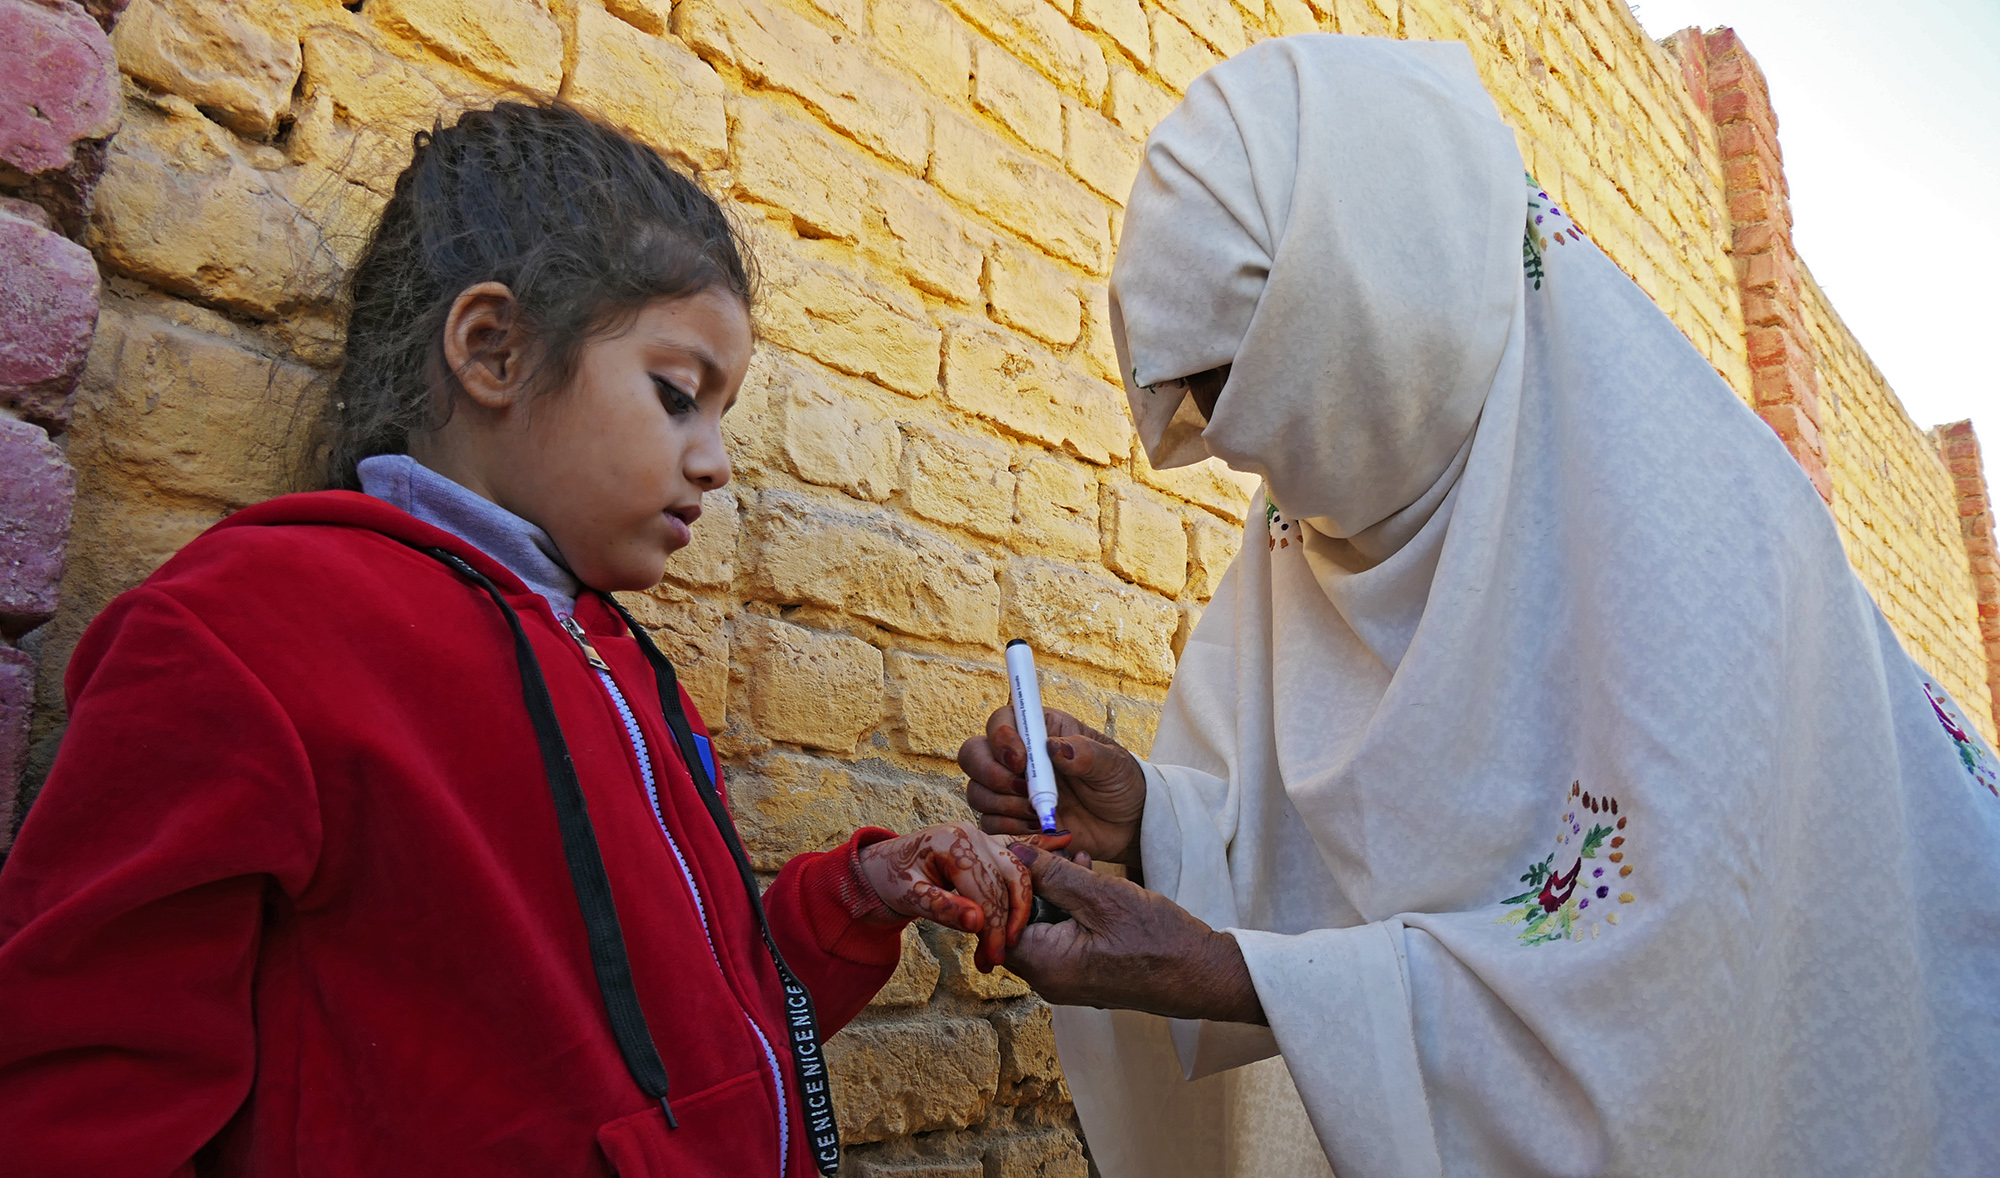 77-year-old ‘Dadi’ does her part in Polio eradication by administering drops to children in Pishin